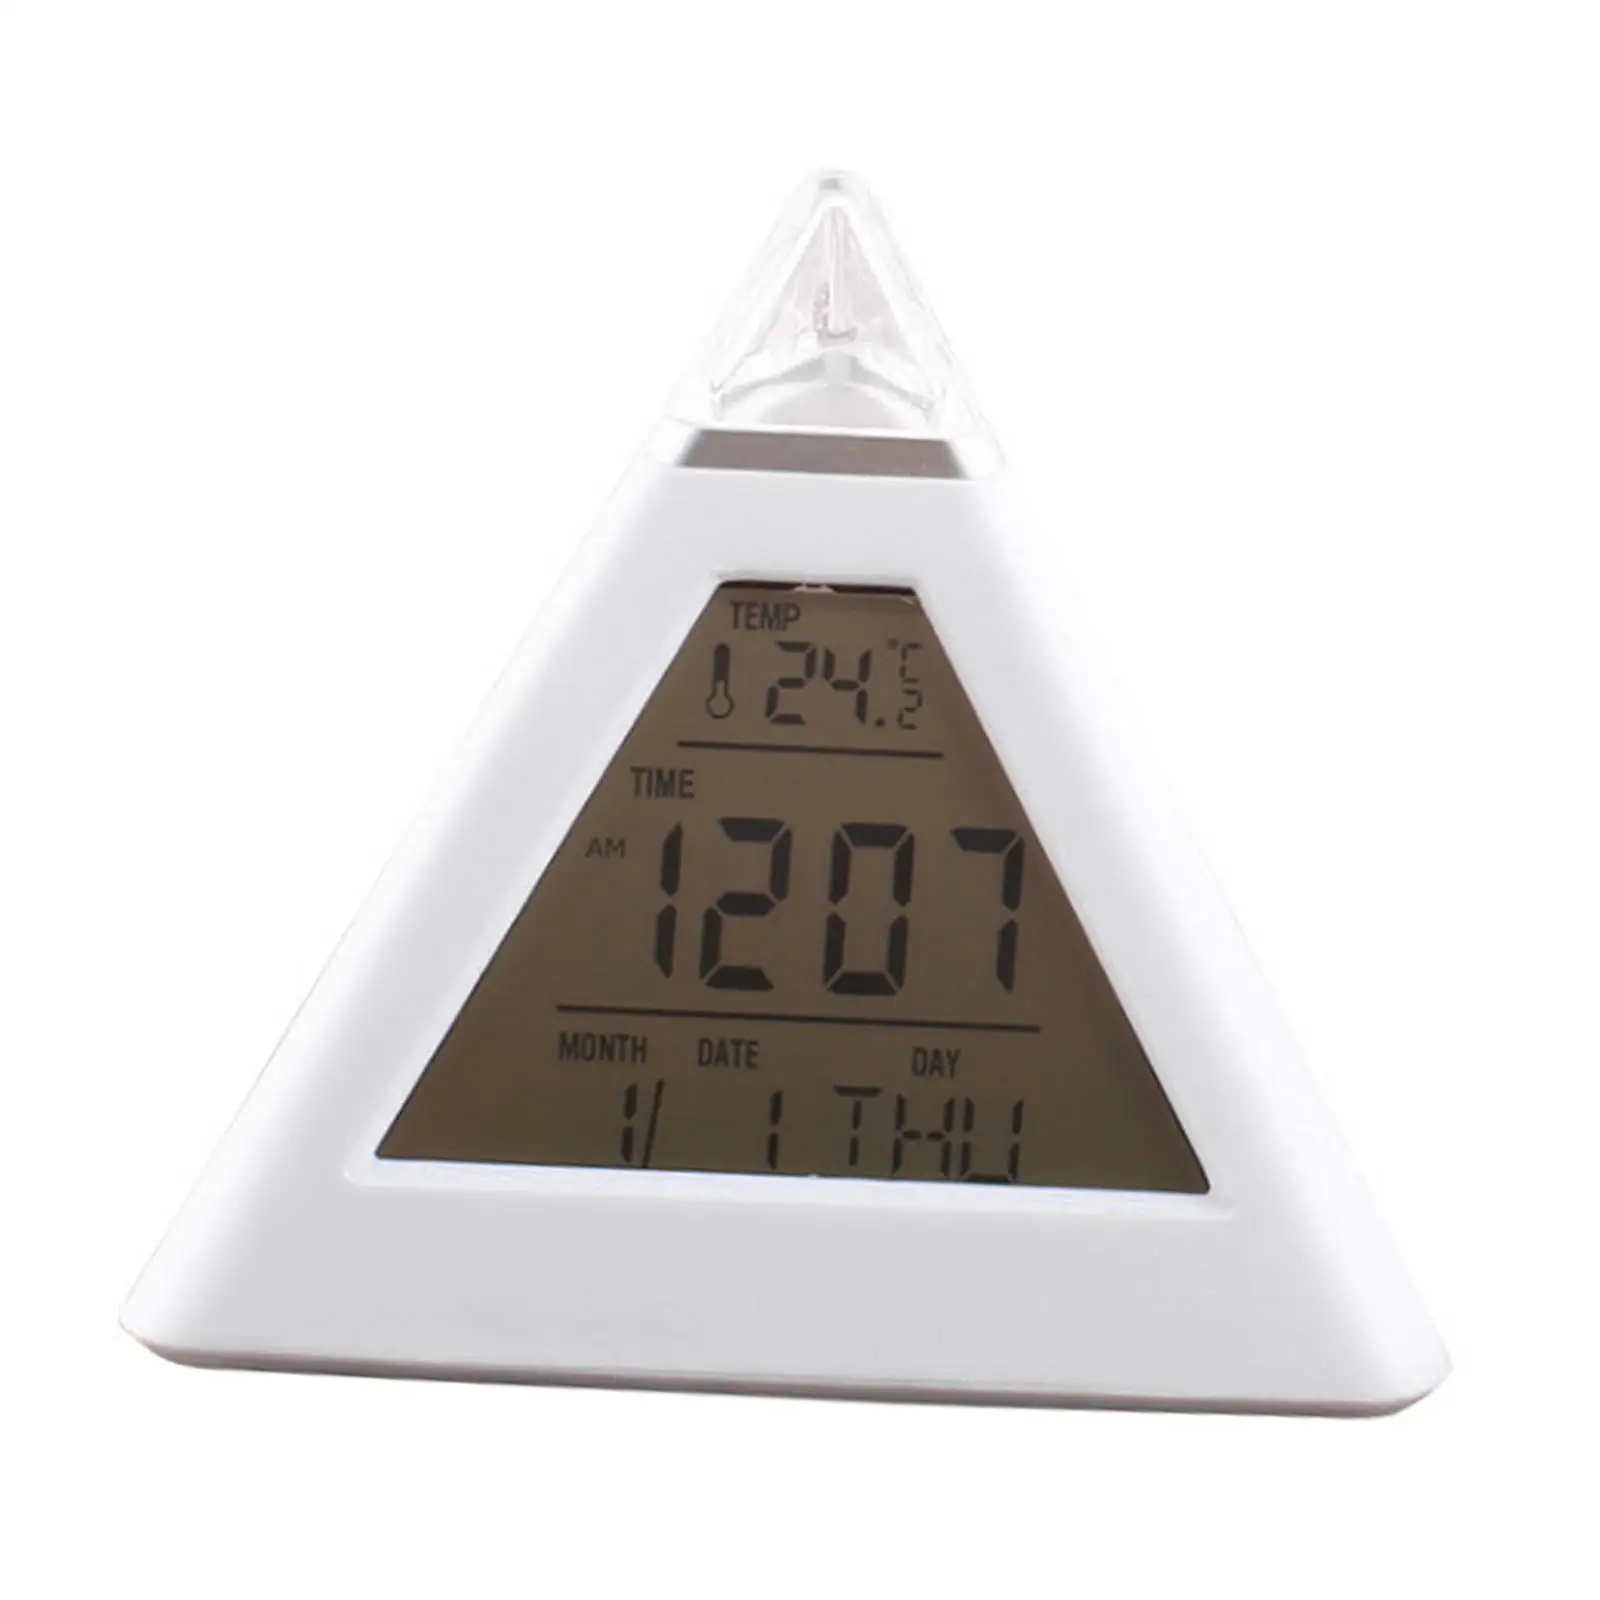 Digital Triangle Alarm Clock Decor Snooze Function Calendar Temperature Time Week Table Clock for Home Room